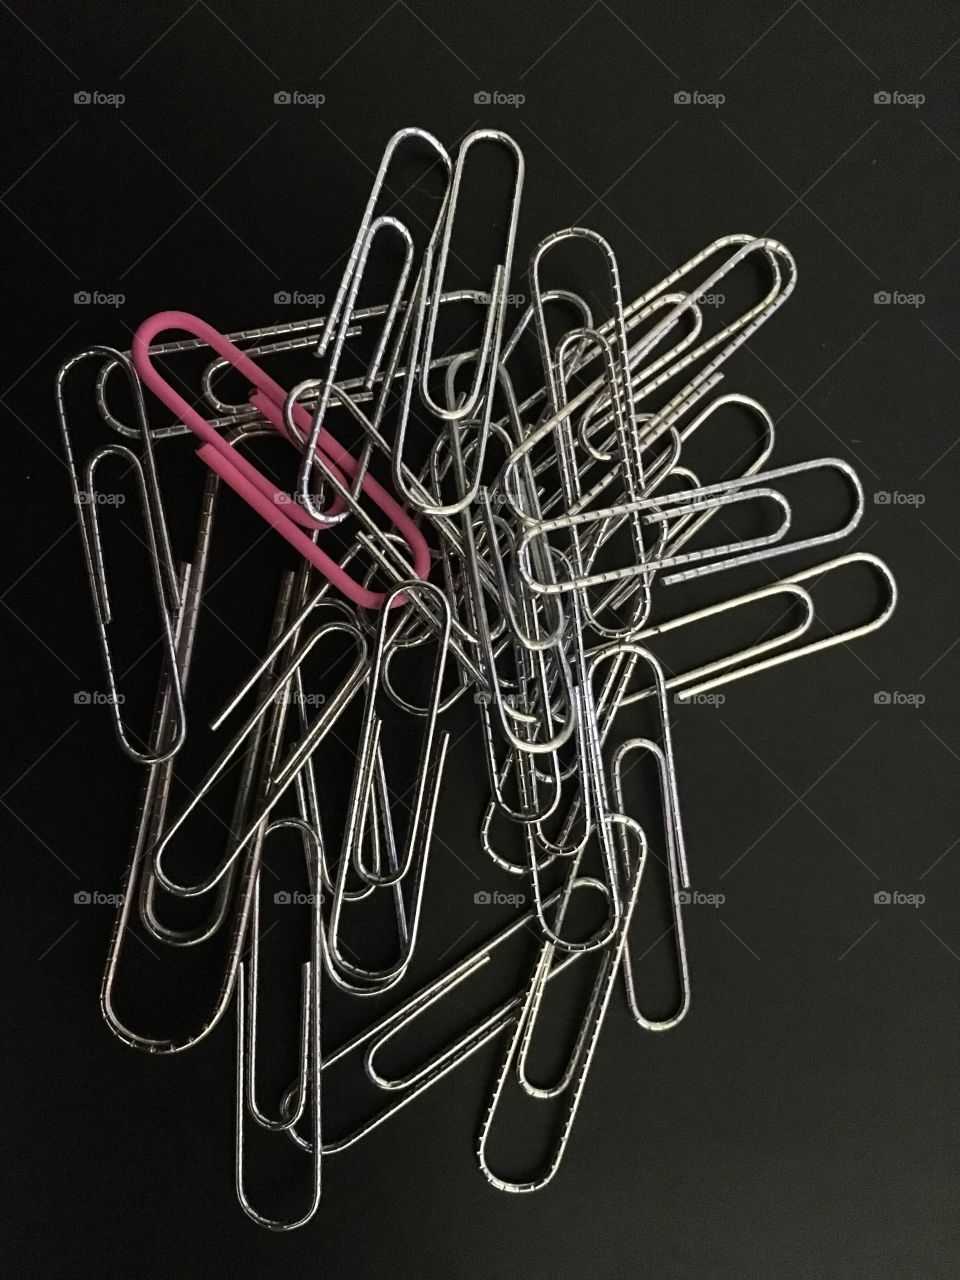 Random image of paper clips waiting to be used